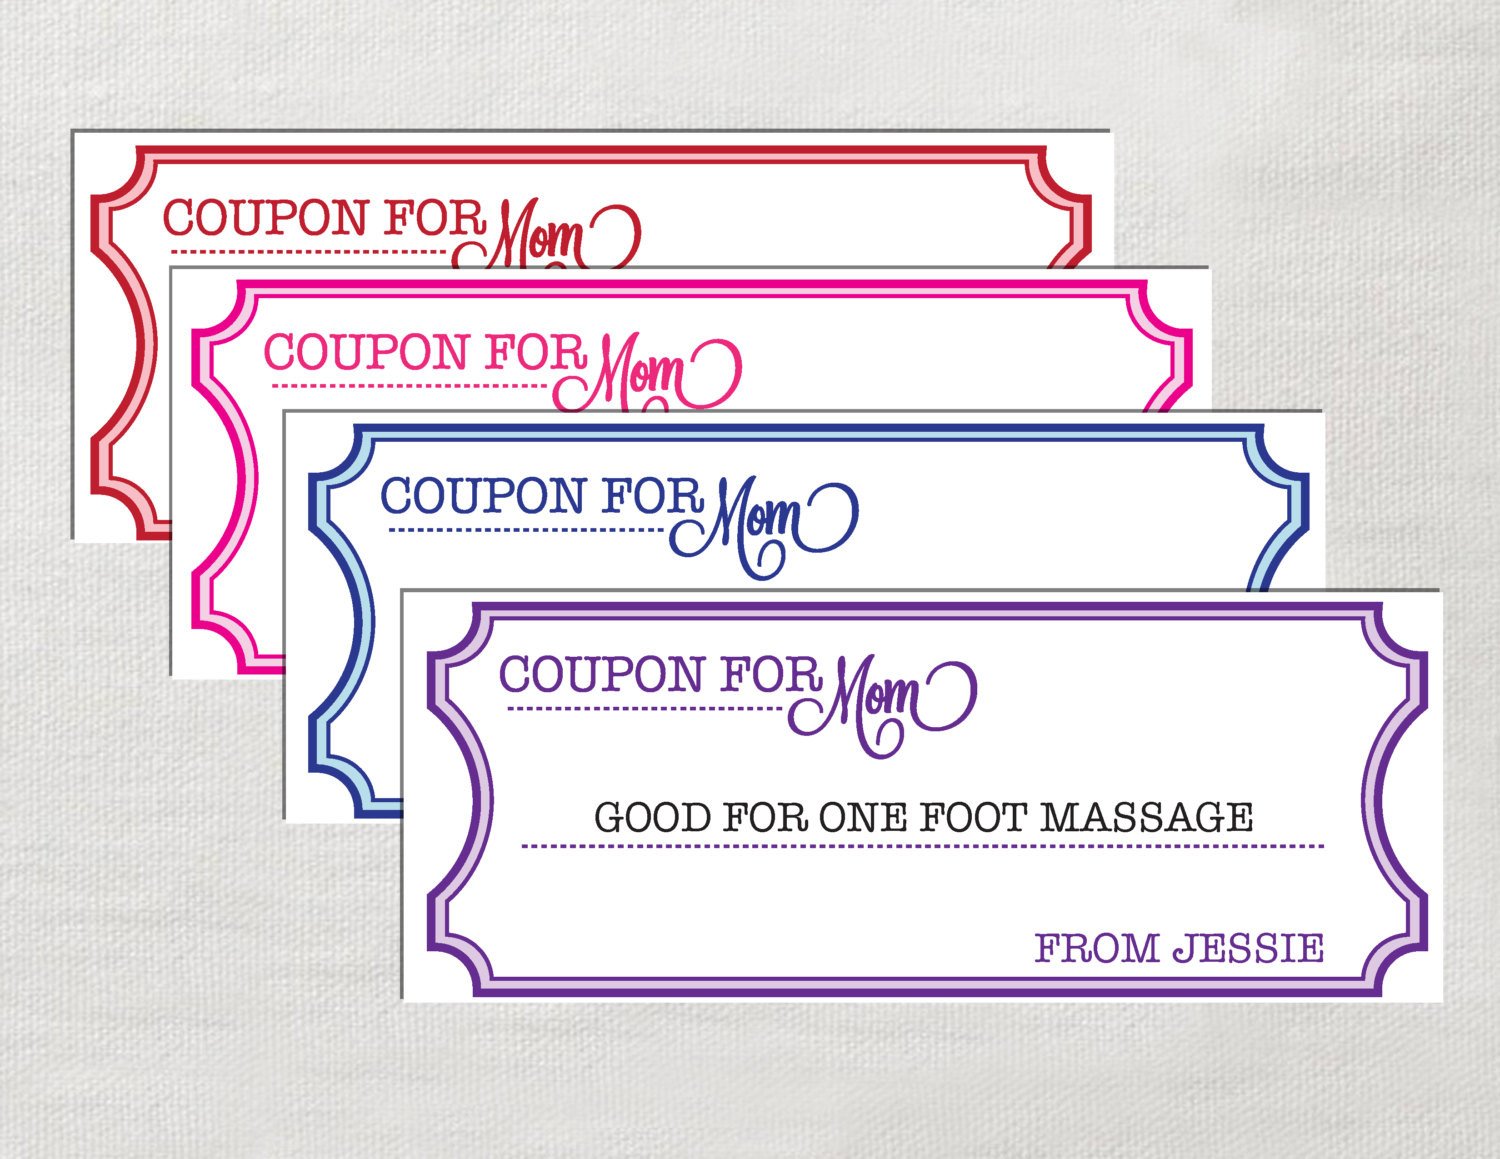 Coupons for Mom Instant Download editable by LaurEvansDesign